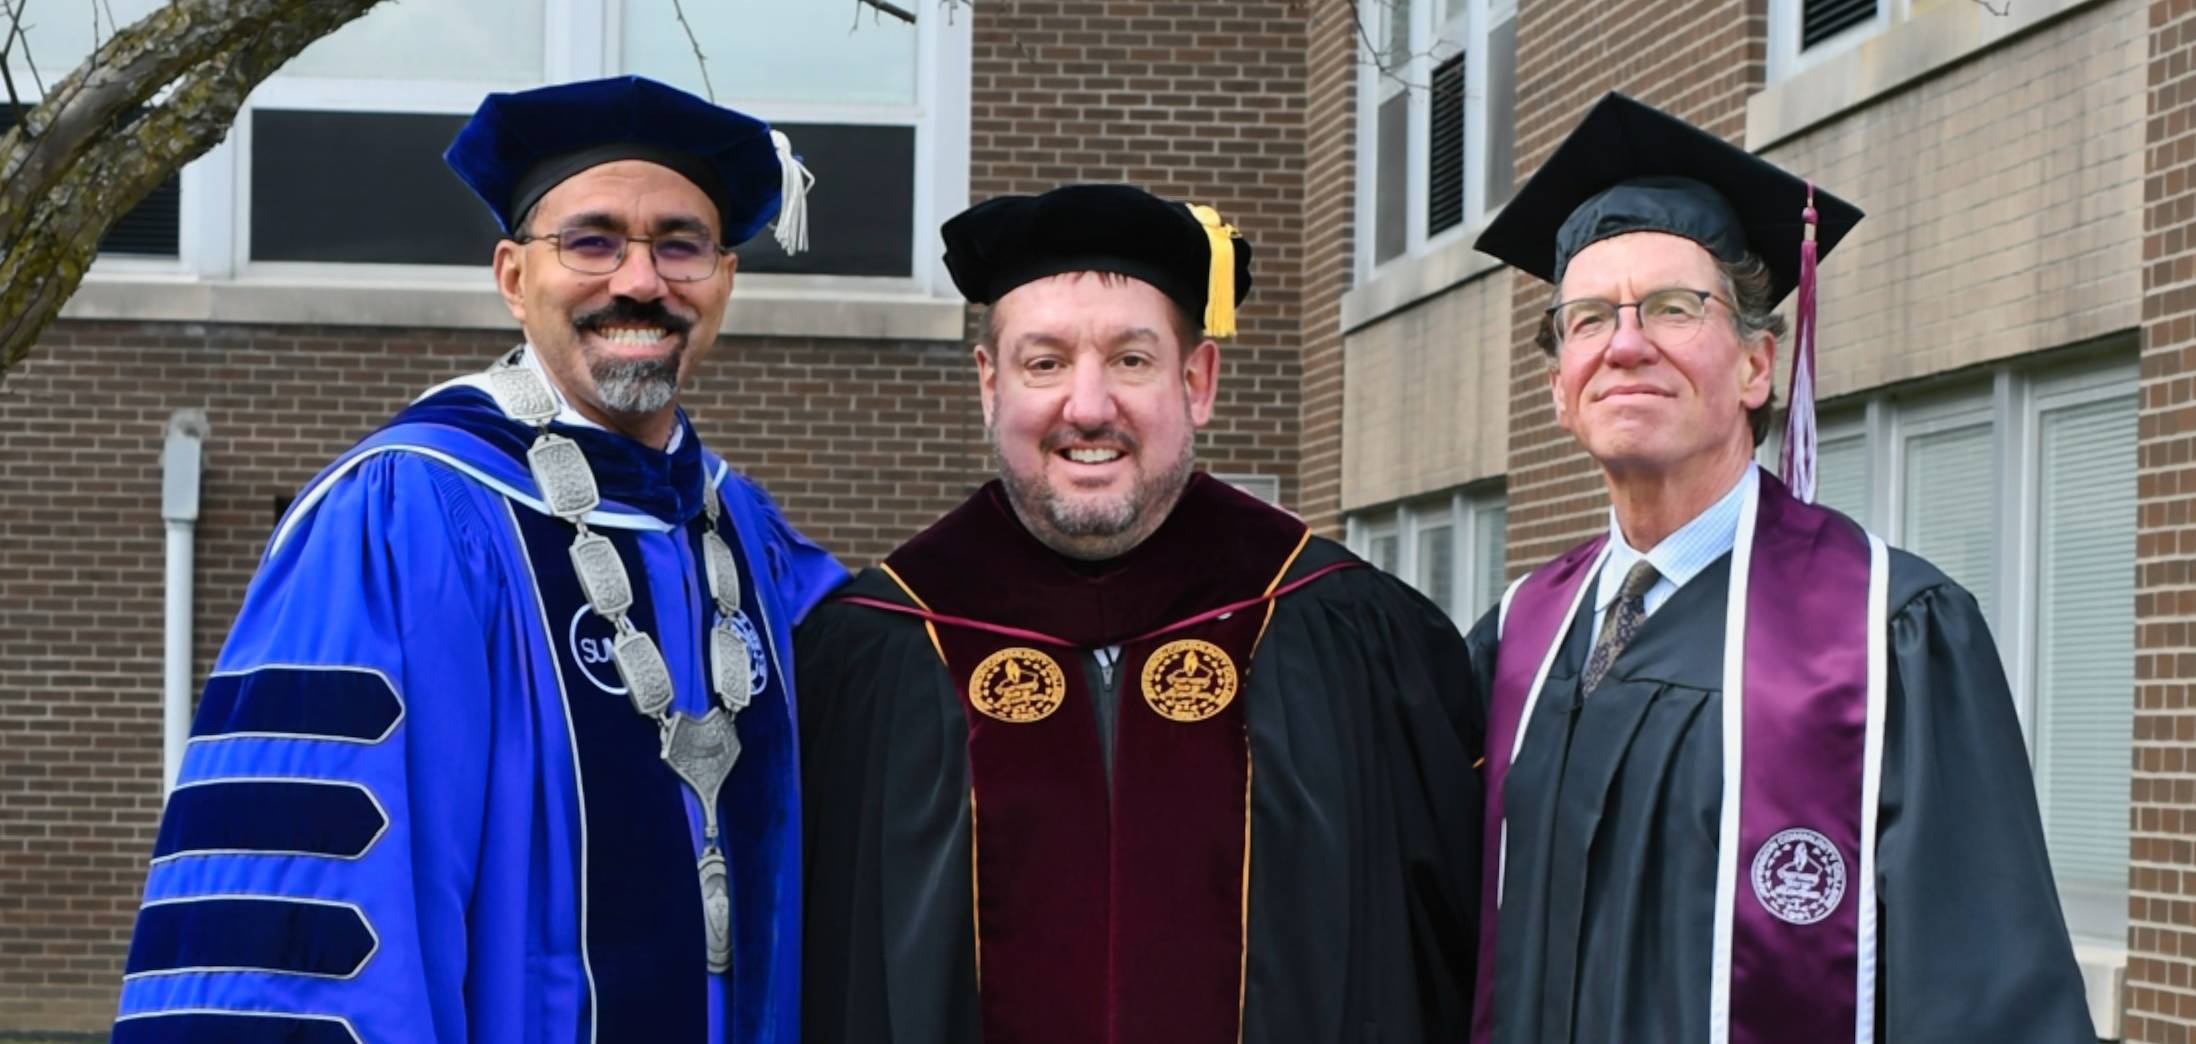 Image of Dan, Chancellor, and Trustee